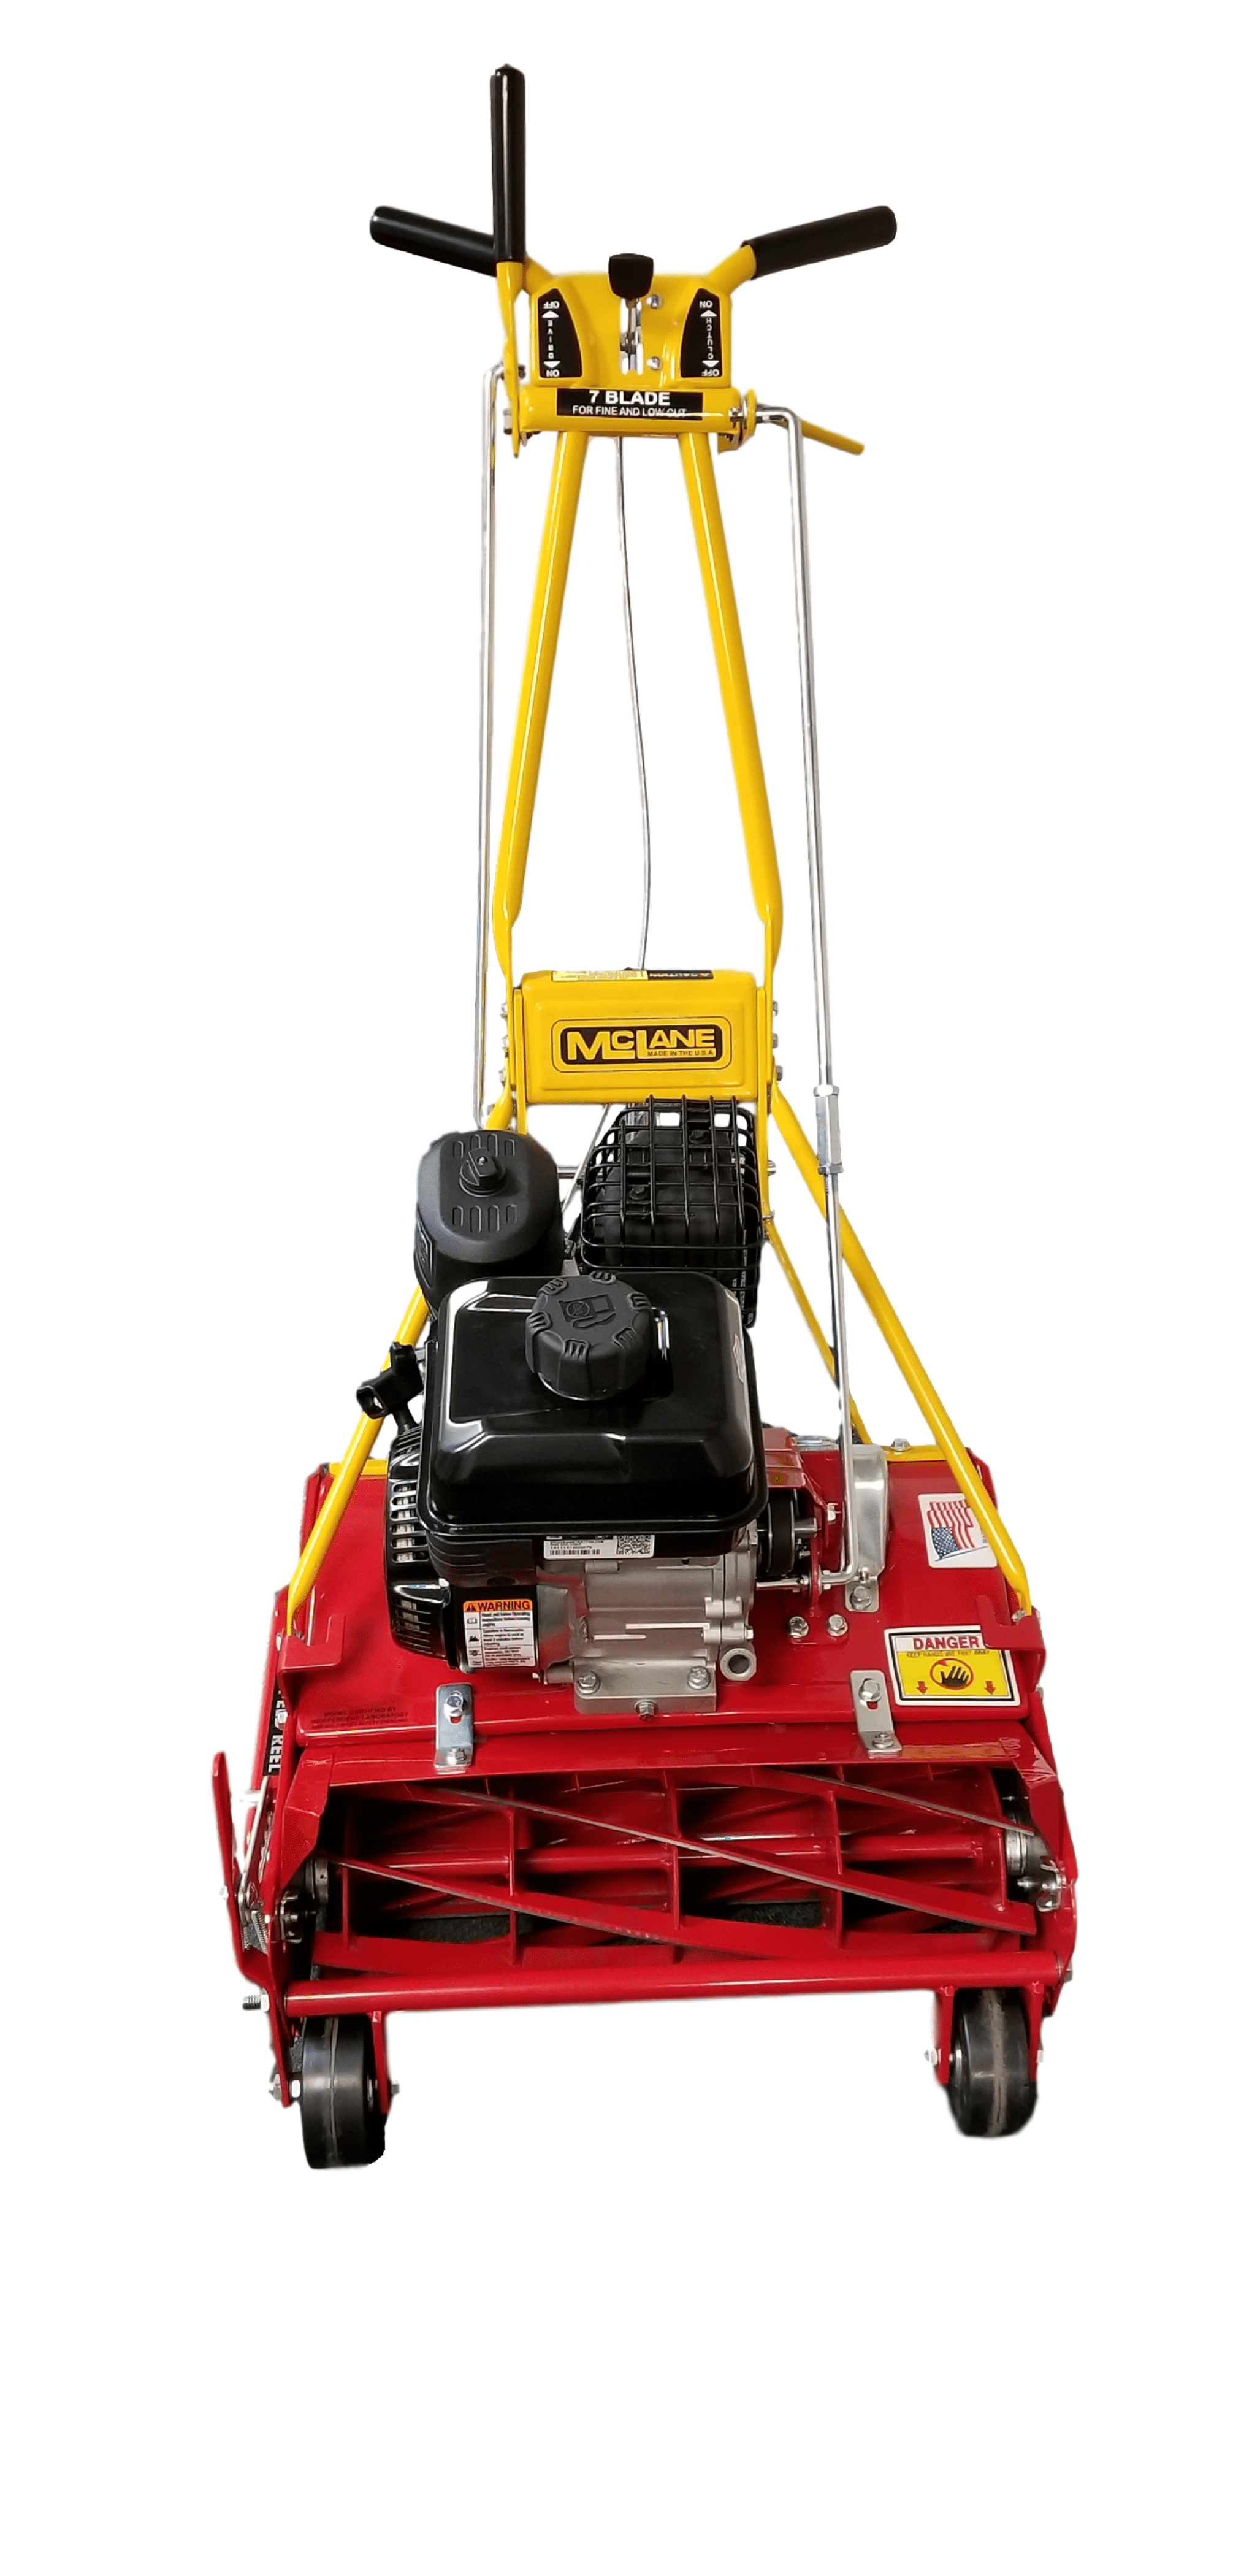 McLane 20 Front-Throw Reel Mower with Touch-a-matic Engine Clutch Control